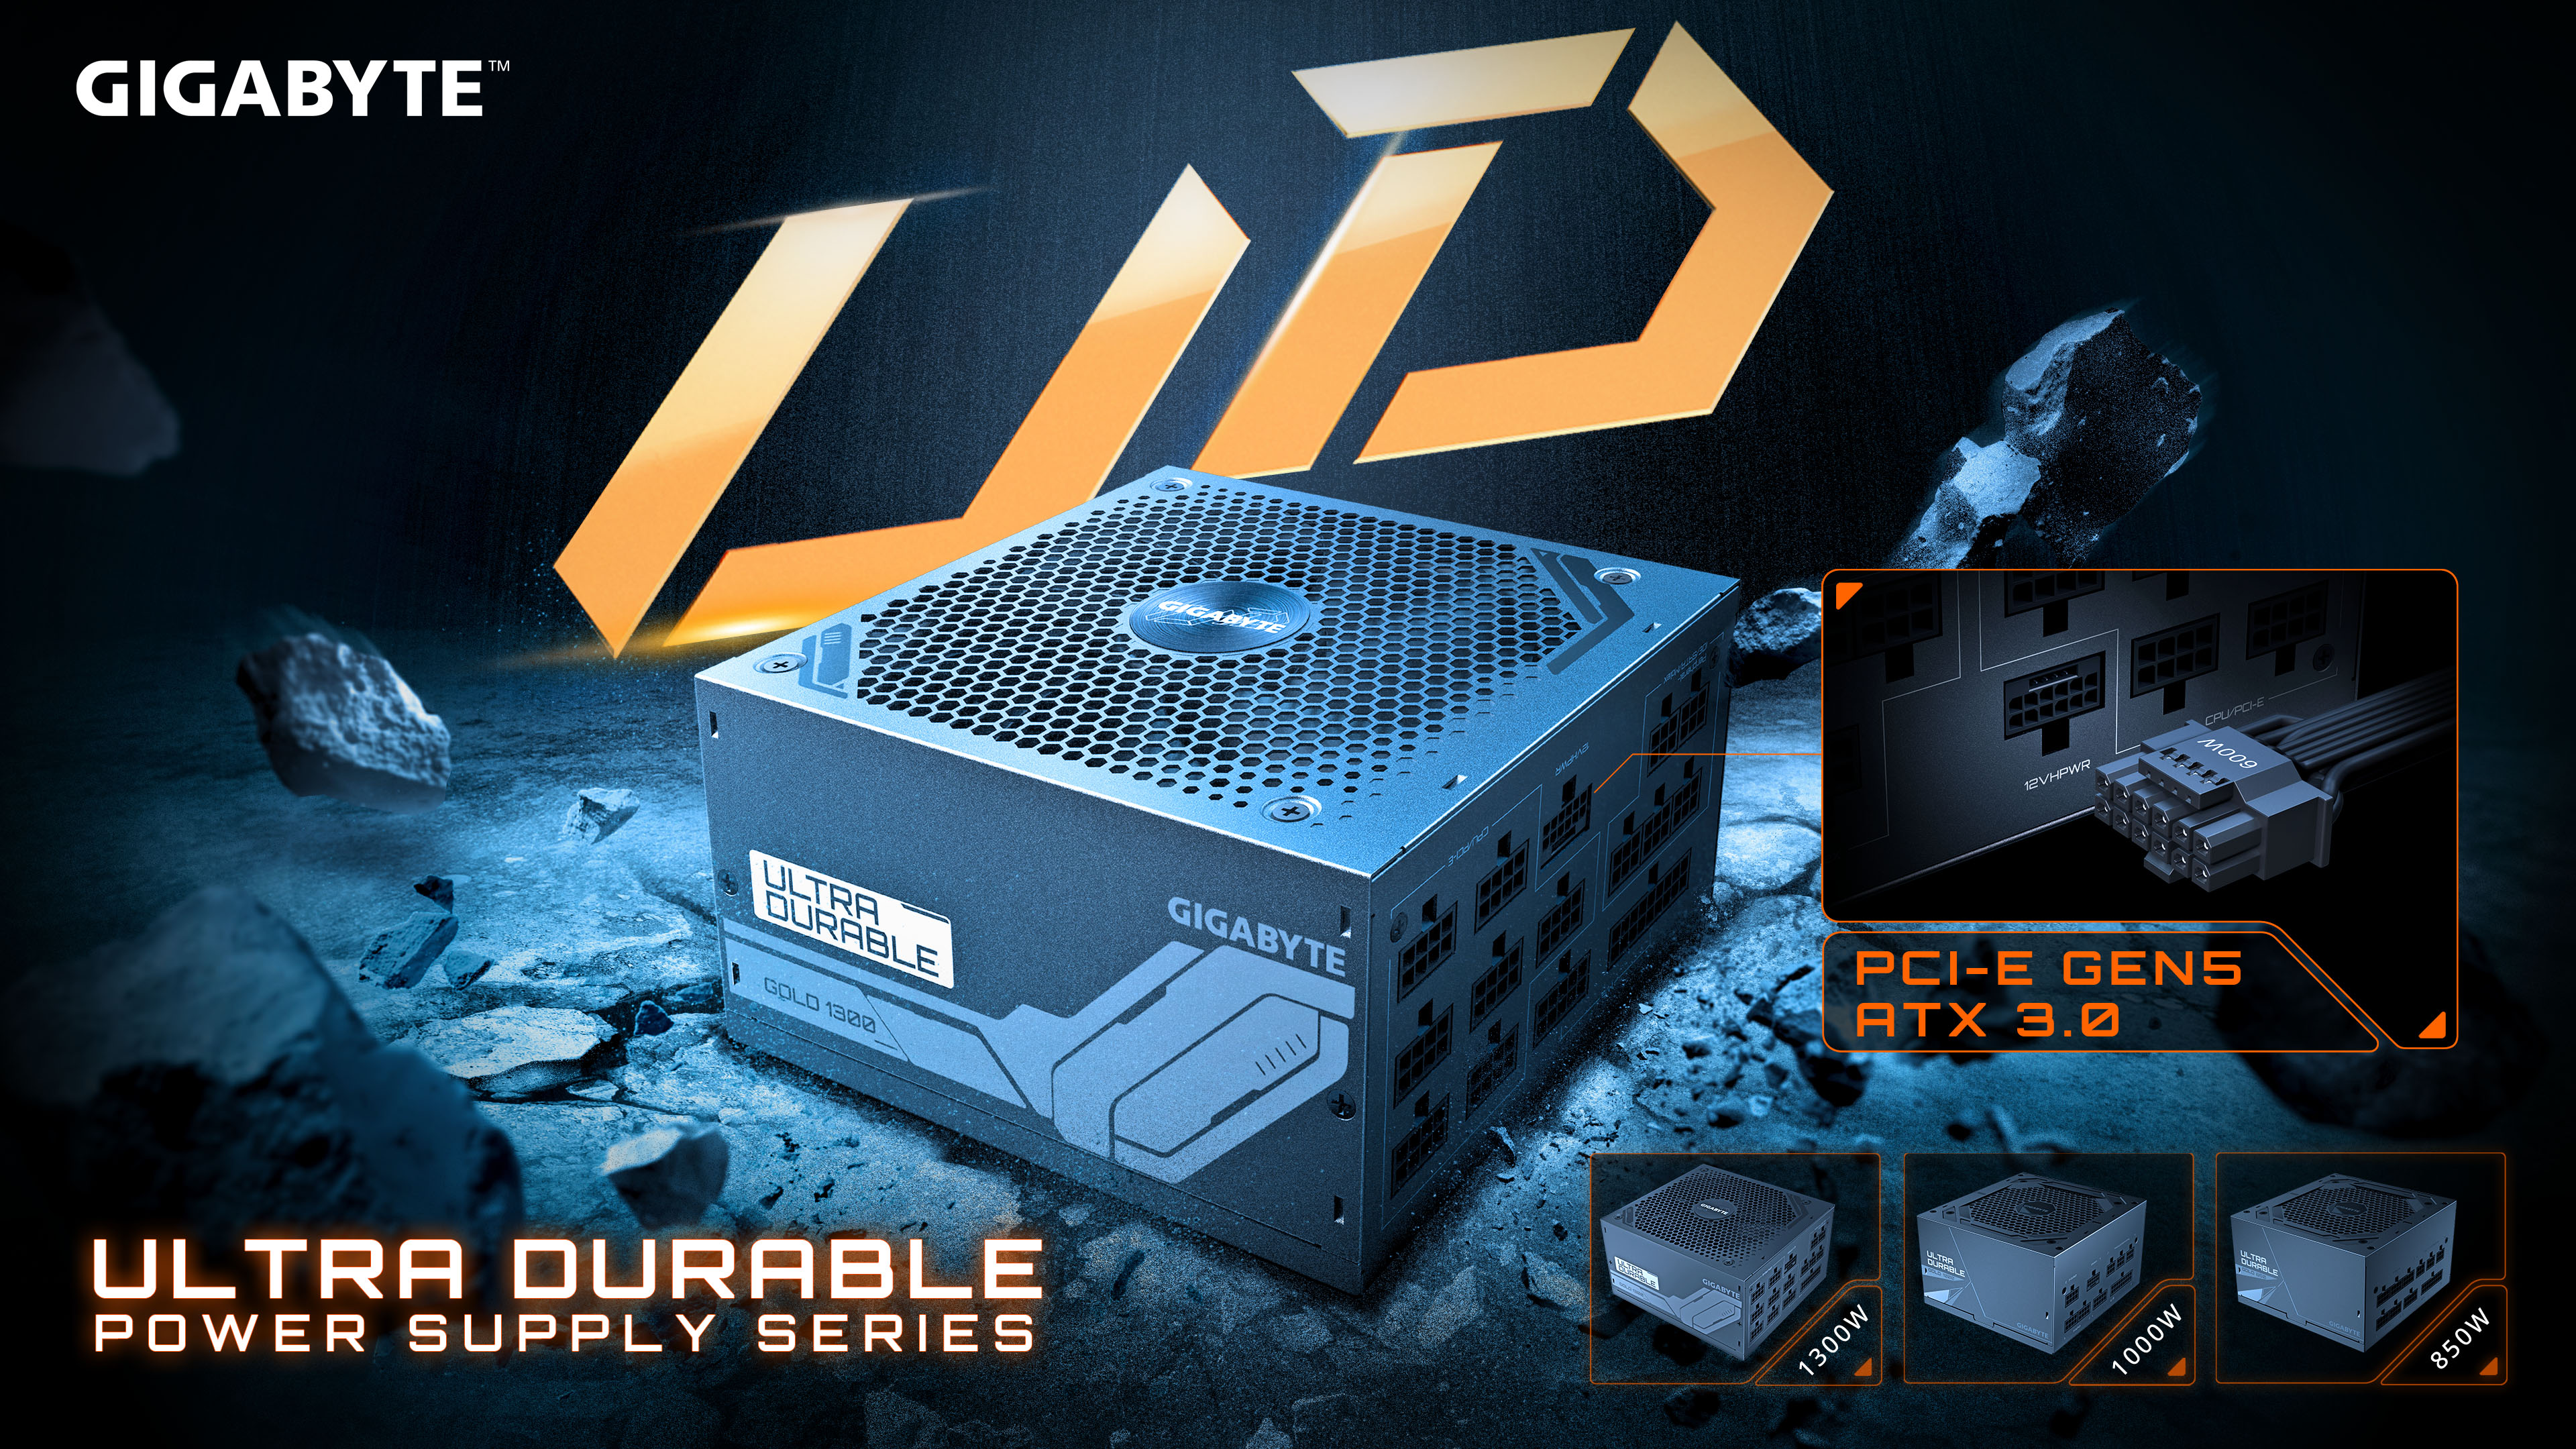 GIGABYTE Launches the UD1300GM PCIE 5.0 Power Supply